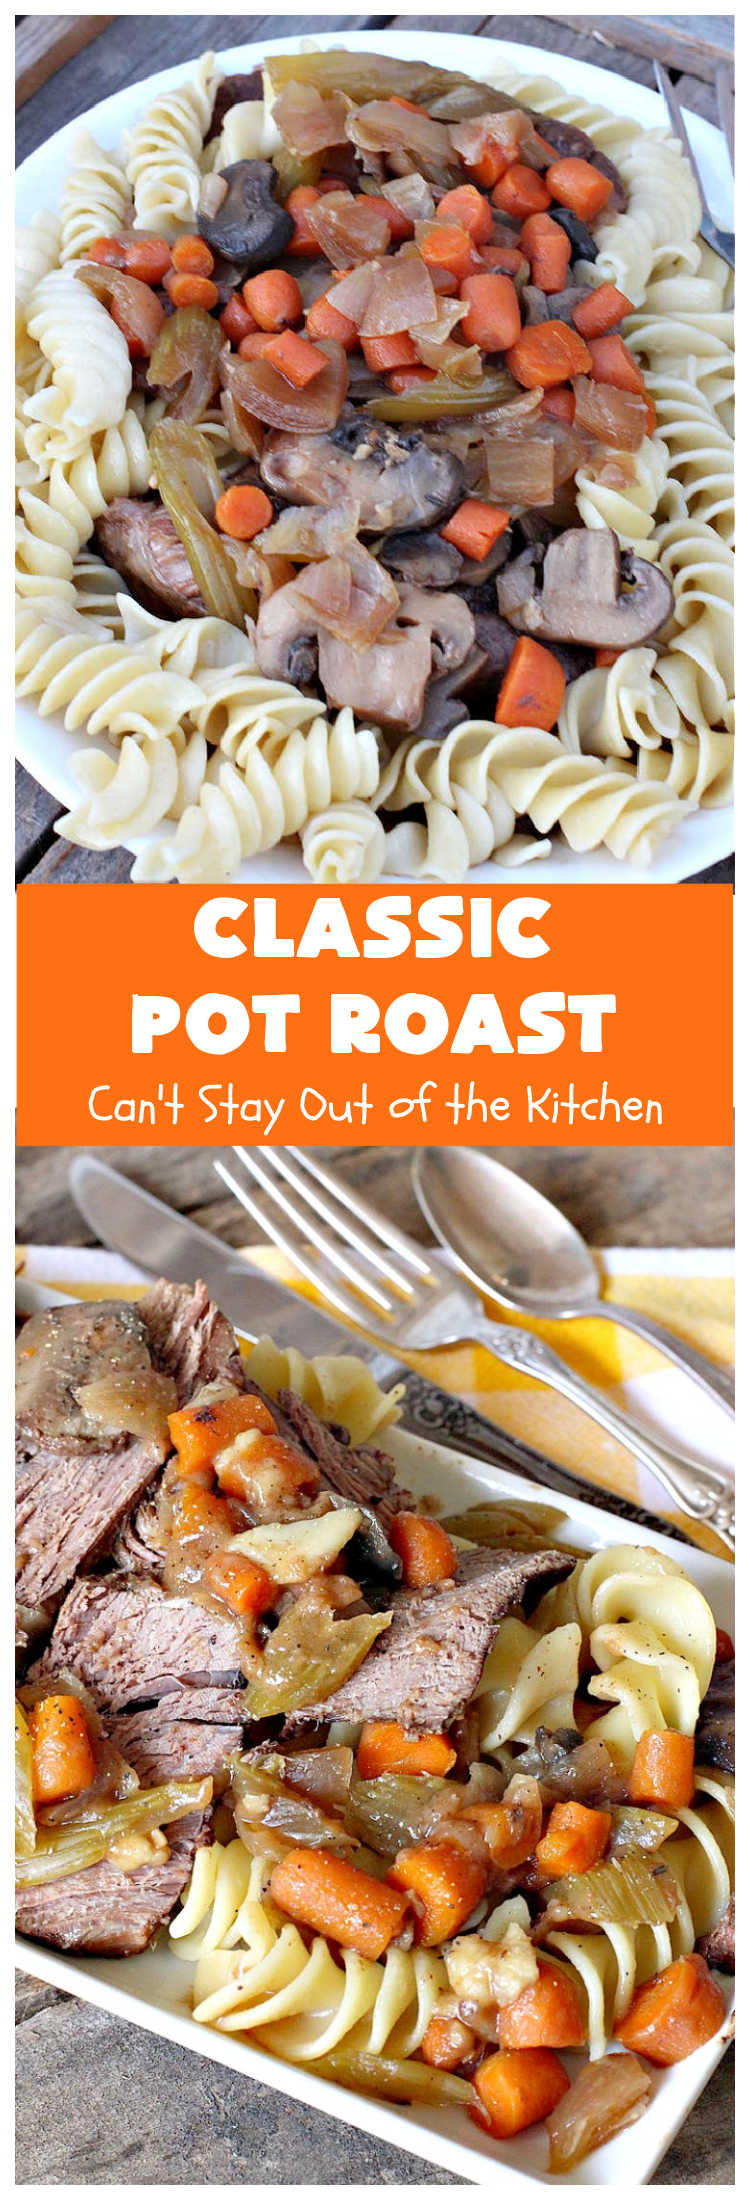 Classic Pot Roast | Can't Stay Out of the Kitchen | this fantastic #SlowCooker #PotRoast is perfect for cold, dreary & drab winter days. It's a hearty, comforting & satisfying meal that will warm you up pronto! Every bite is succulent & mouthwatering. #beef #pasta #carrots #CompanyMainDish #RoastBeef #RoastBeefDinner #ClassicPotRoastClassic Pot Roast | Can't Stay Out of the Kitchen | this fantastic #SlowCooker #PotRoast is perfect for cold, dreary & drab winter days. It's a hearty, comforting & satisfying meal that will warm you up pronto! Every bite is succulent & mouthwatering. #beef #pasta #carrots #CompanyMainDish #RoastBeef #RoastBeefDinner #ClassicPotRoast